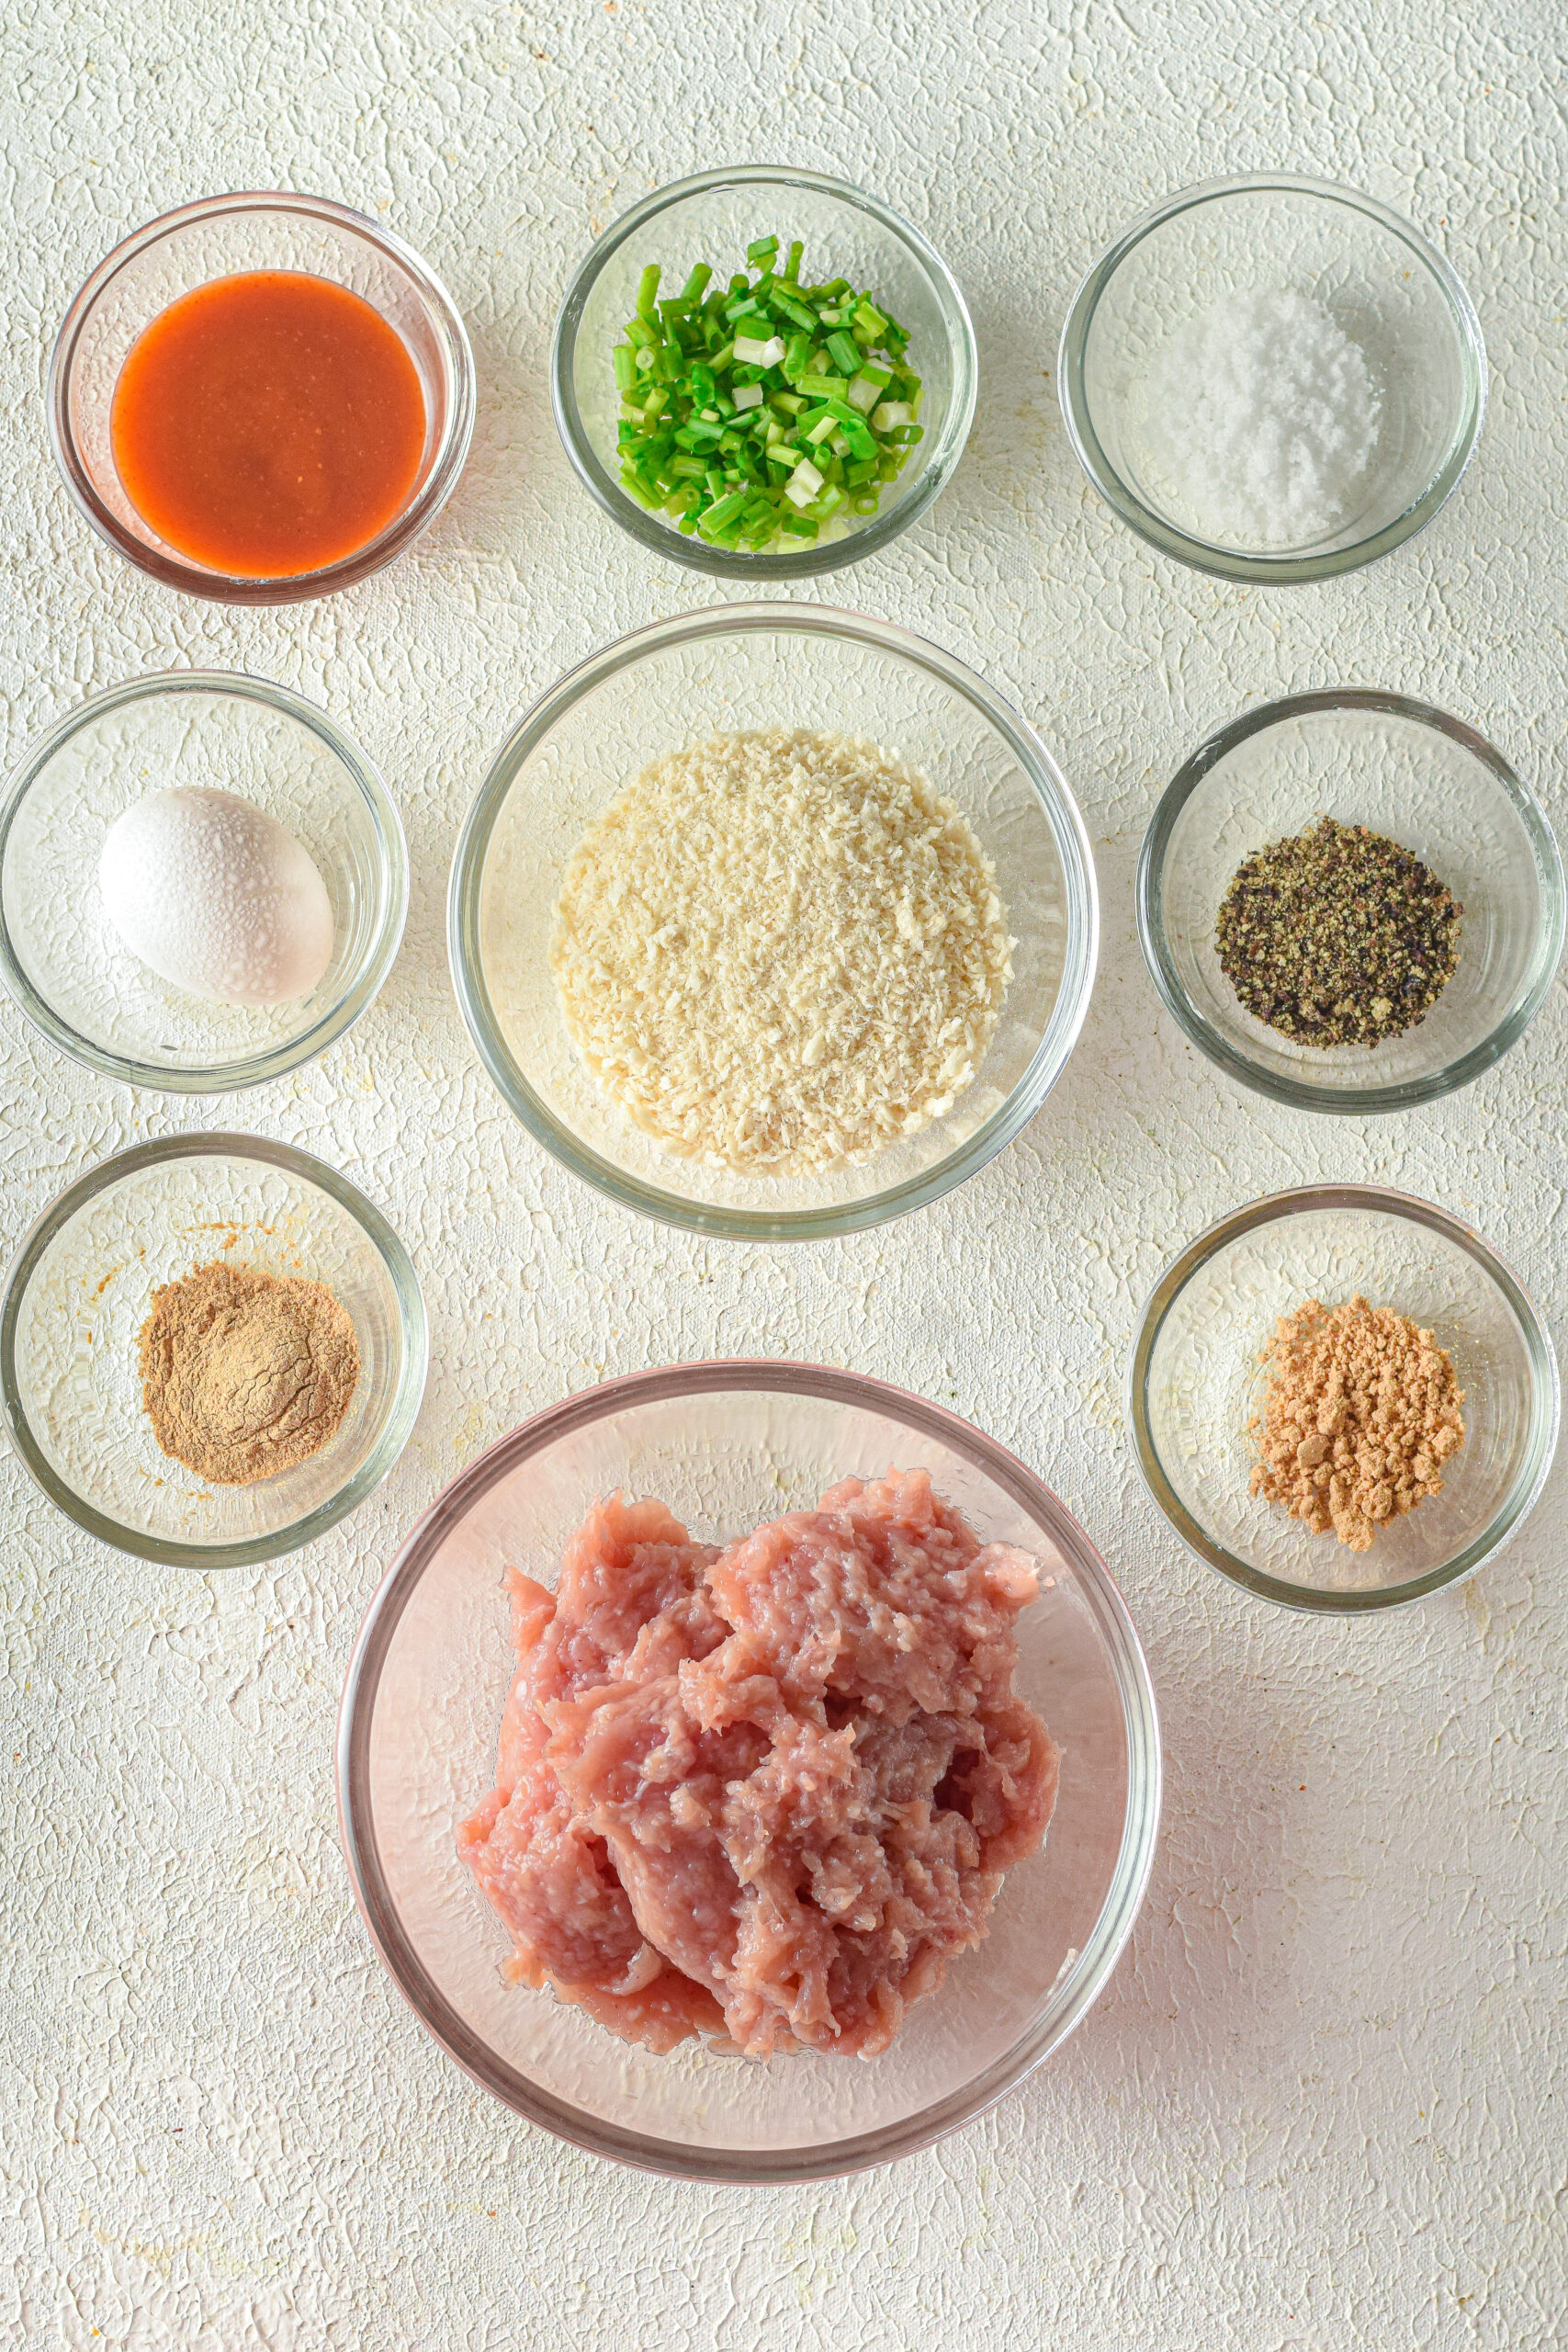 Ingredients in individual small bowls